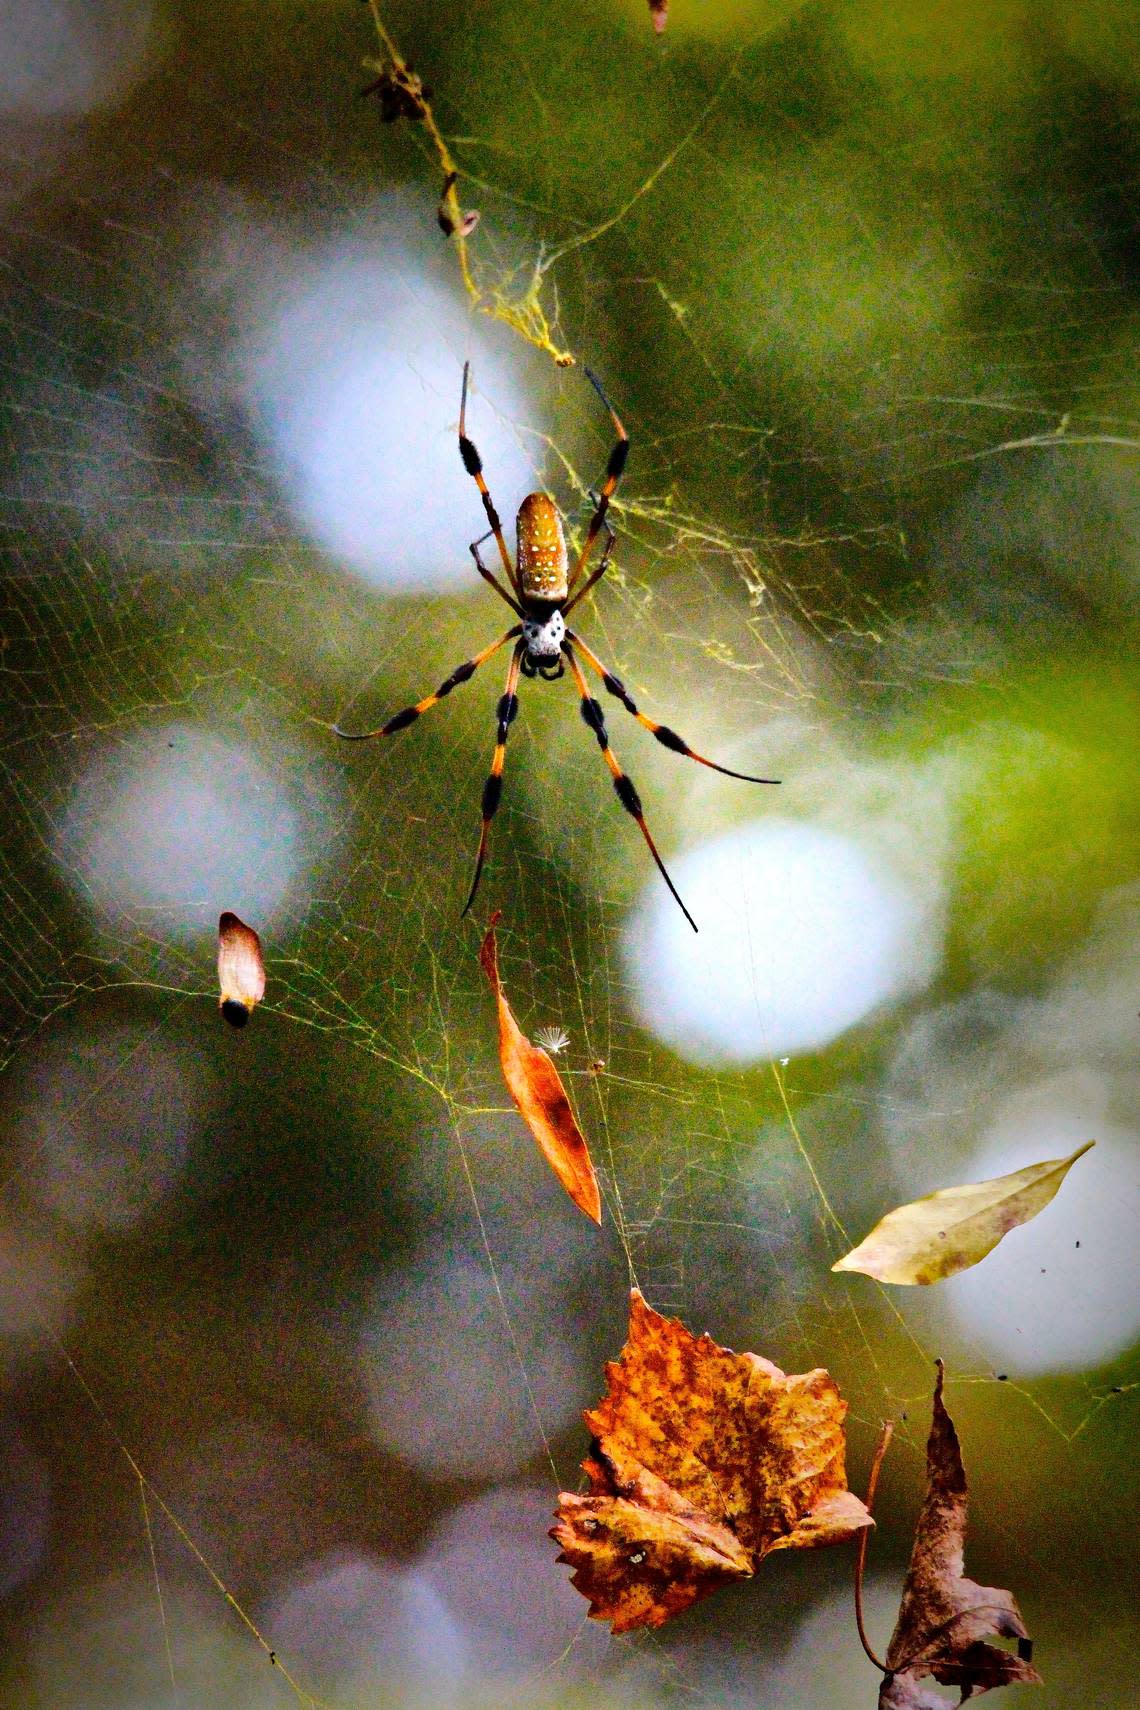 Golden silk orb-weavers, also known as banana spiders, spin thick, durable webs. This one caught and held several leaves. Staff photo